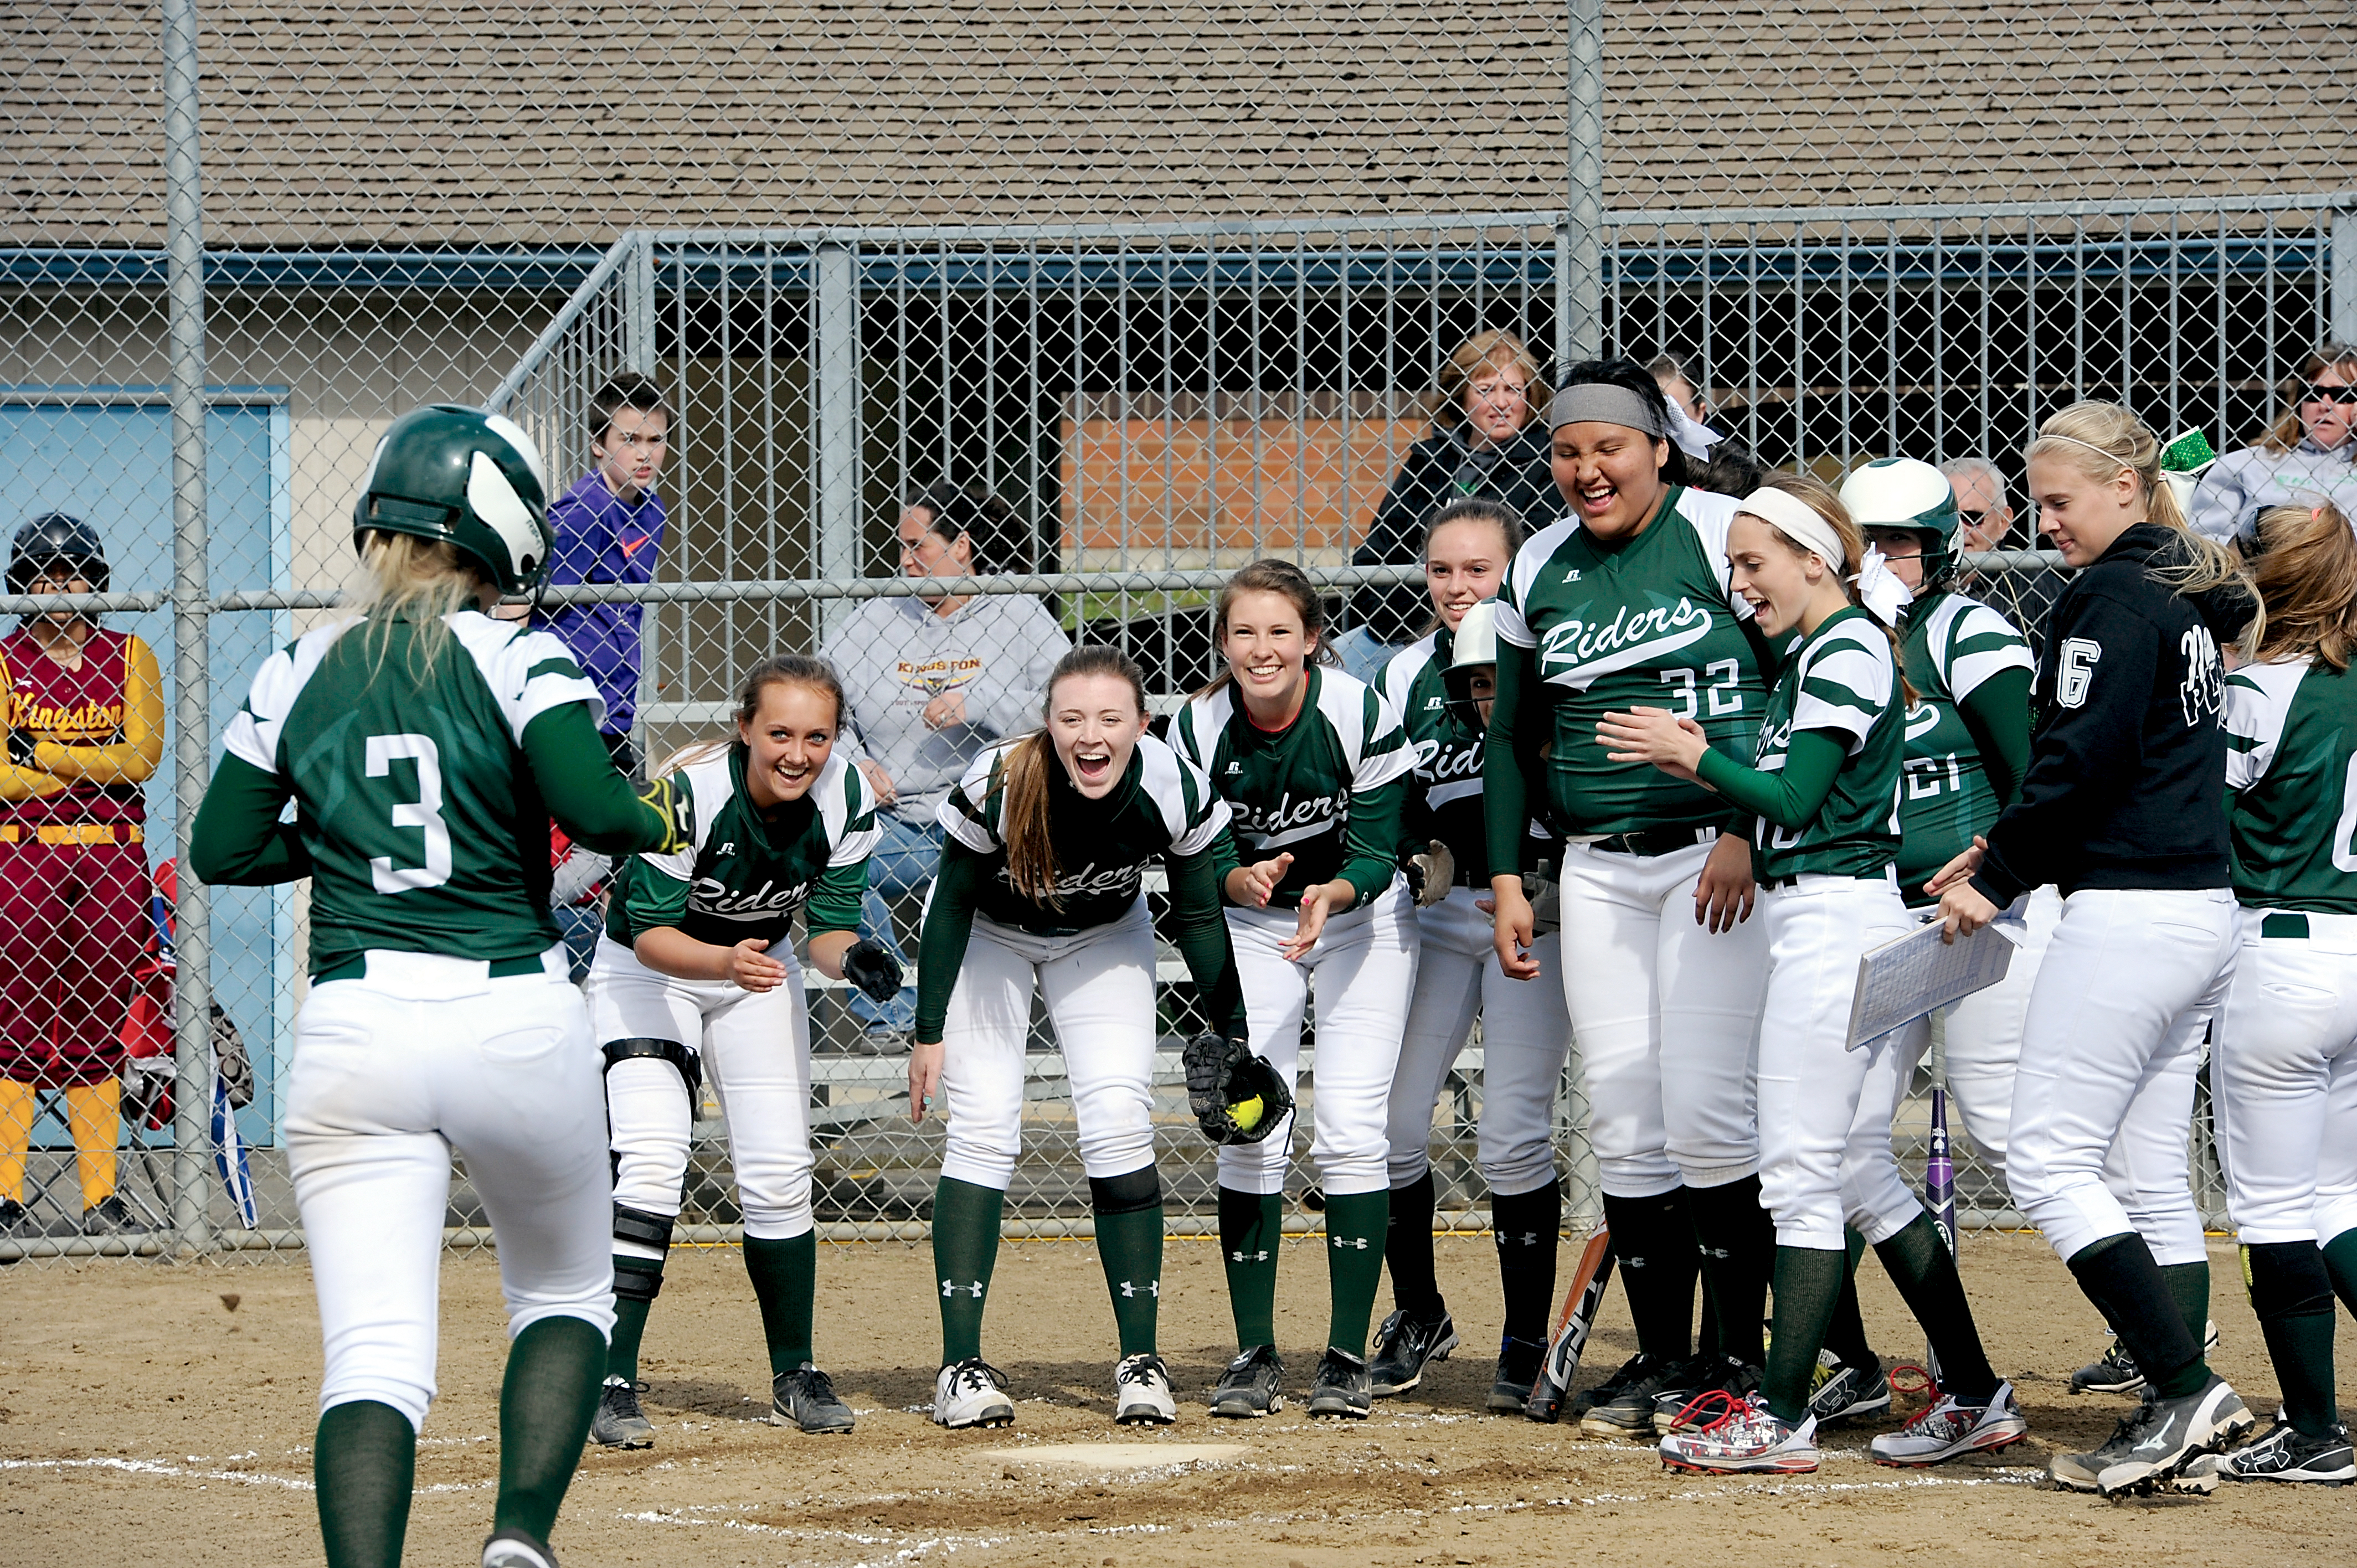 The Port Angeles Roughriders gather at home plate to congratulate Natalie Steinman (3) after hitting the first of her two home runs against Kingston. (Lonnie Archibald/for Peninsula Daily News)